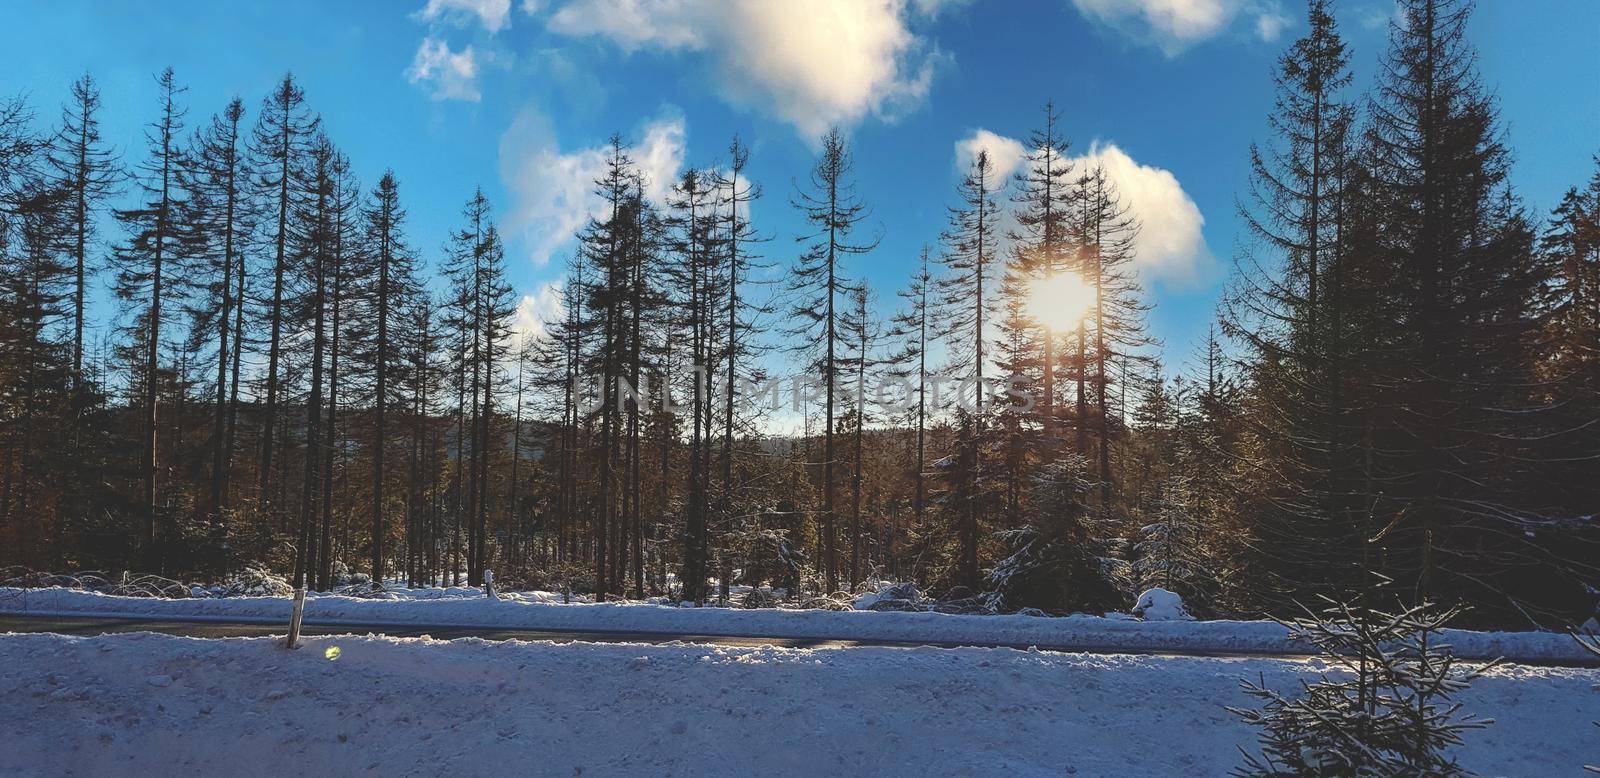 Winter landscape at sunset by a snowy forest lake. Winter pine forest by banate